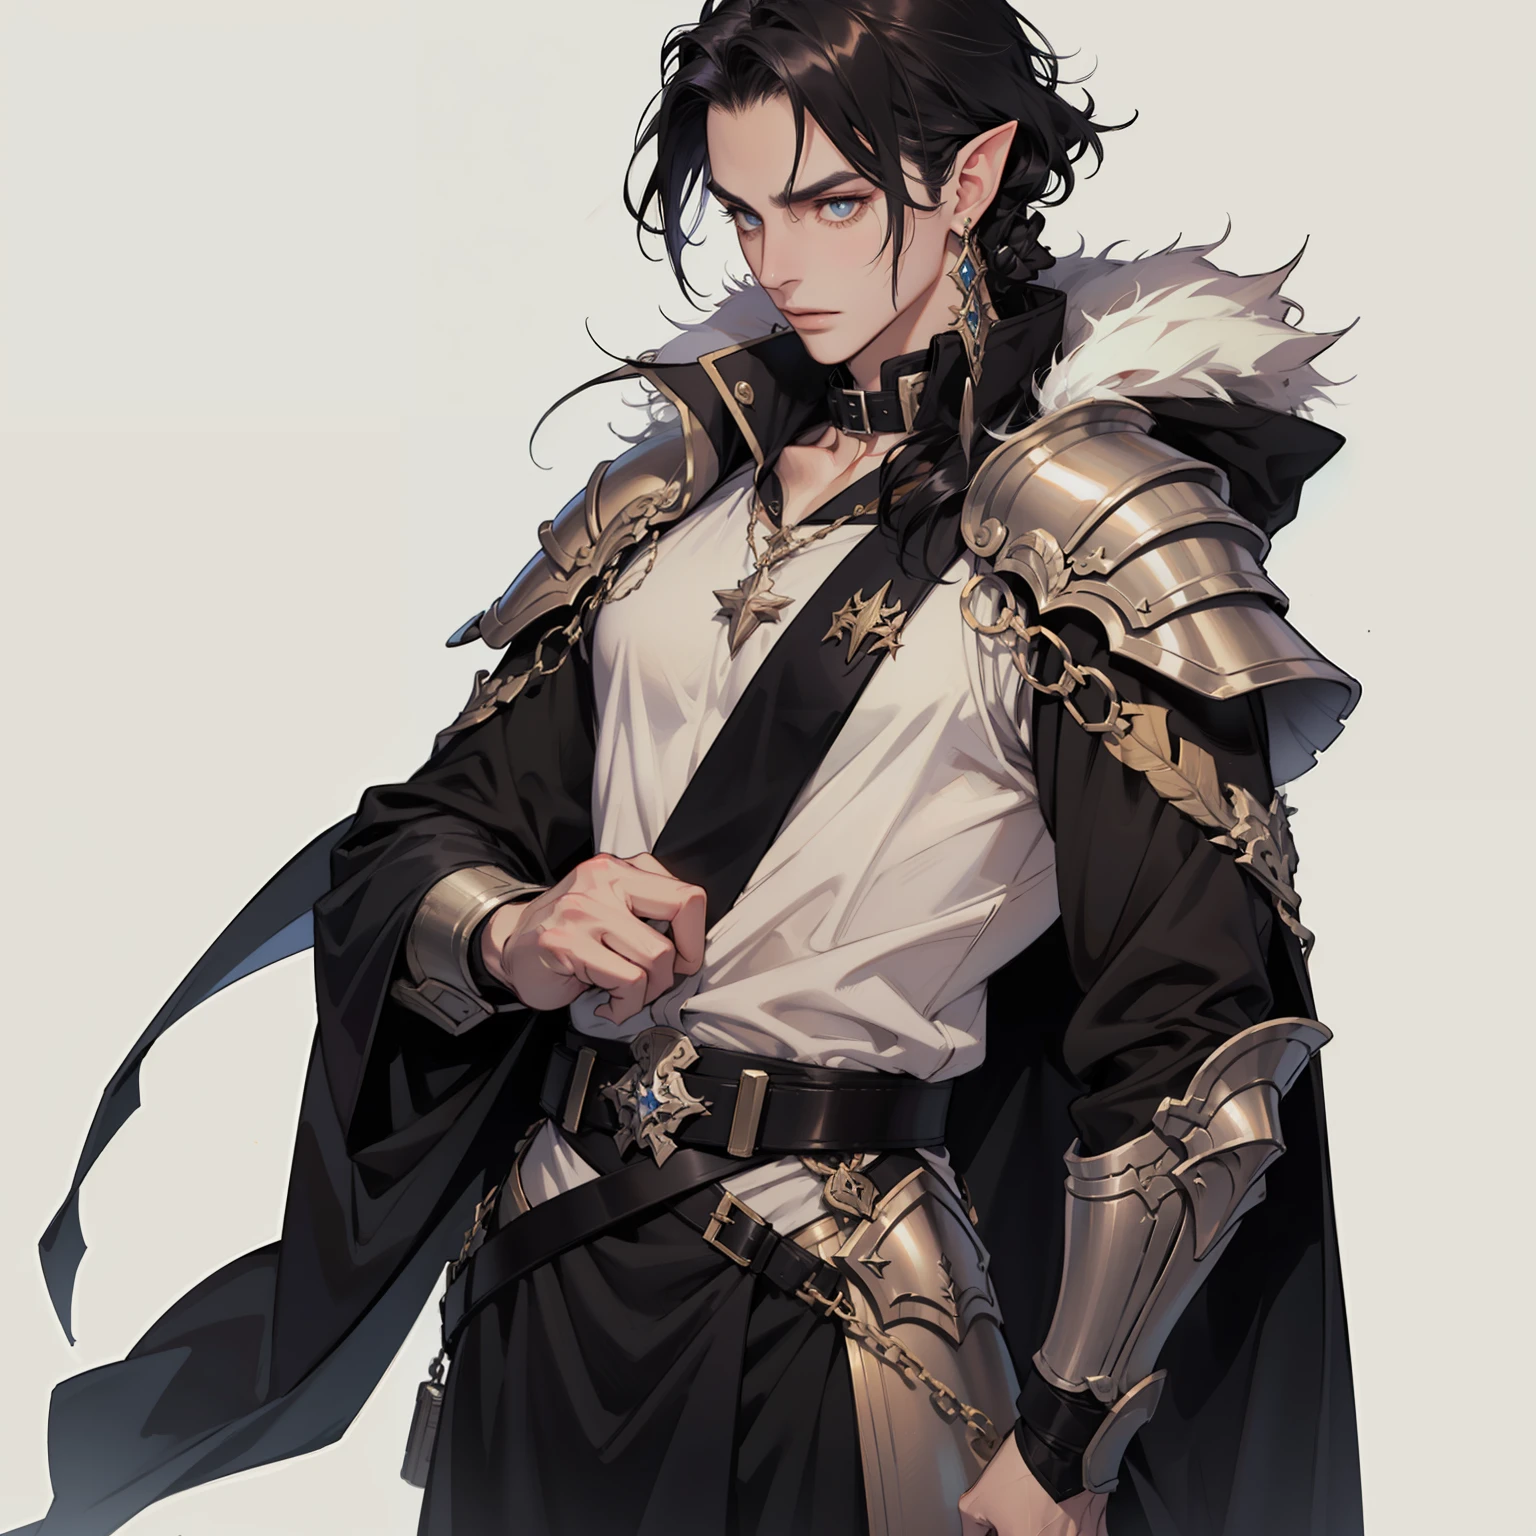 Male mage，with black curled hair，Elves，Black costume，The costume design comes with elements of armor，goth style。Western fantasy style，Concise background。Concise background